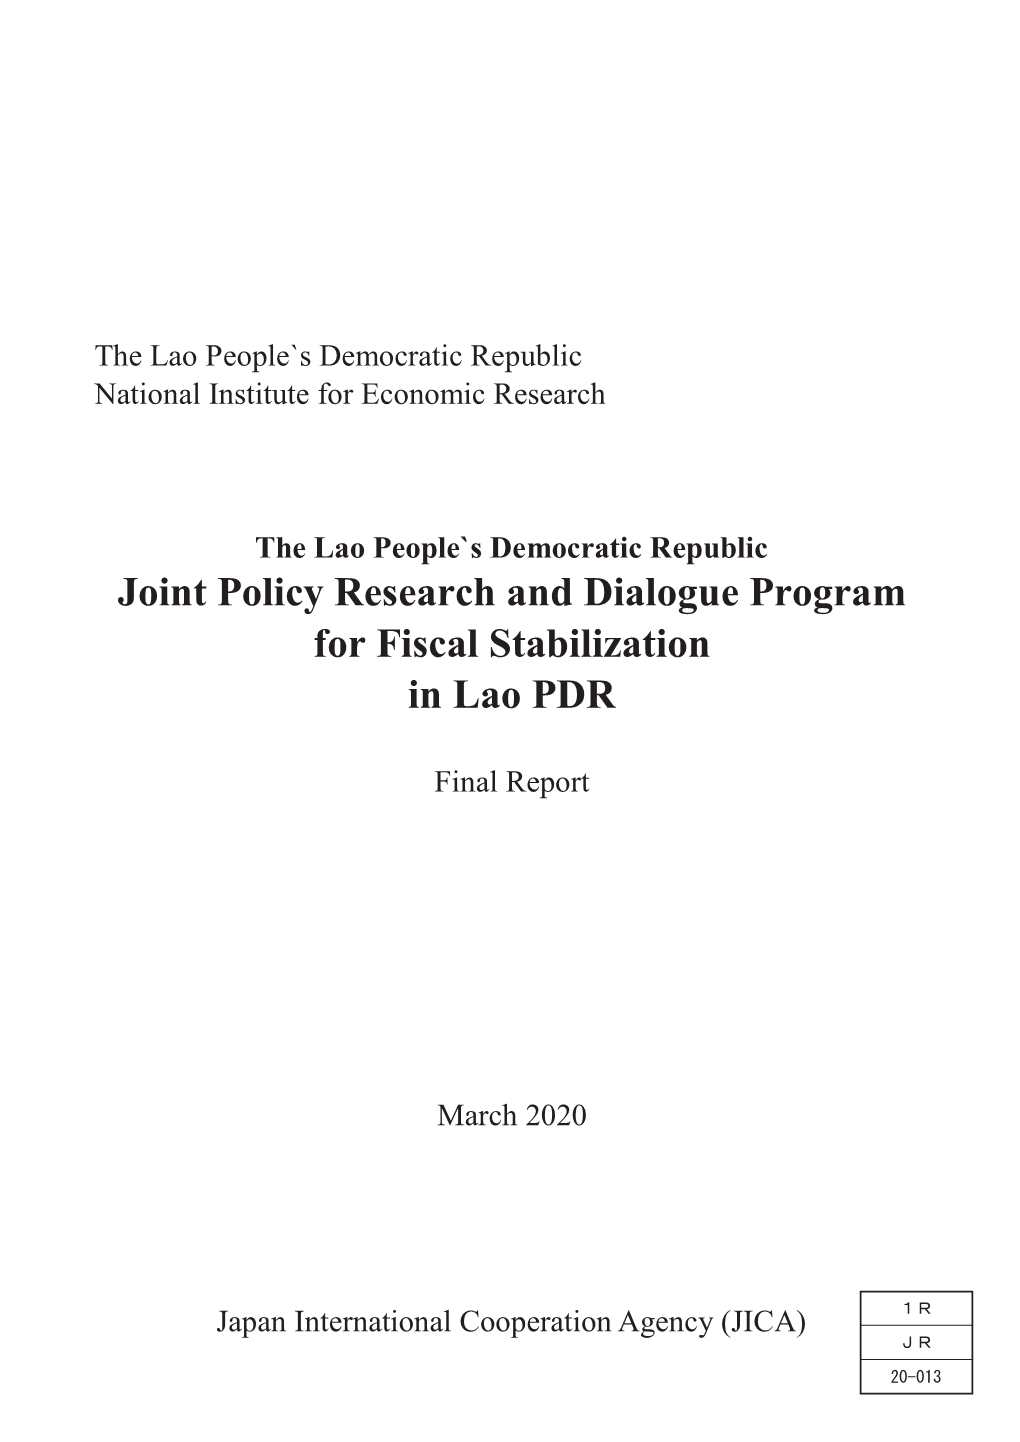 Joint Policy Research and Dialogue Program for Fiscal Stabilization In